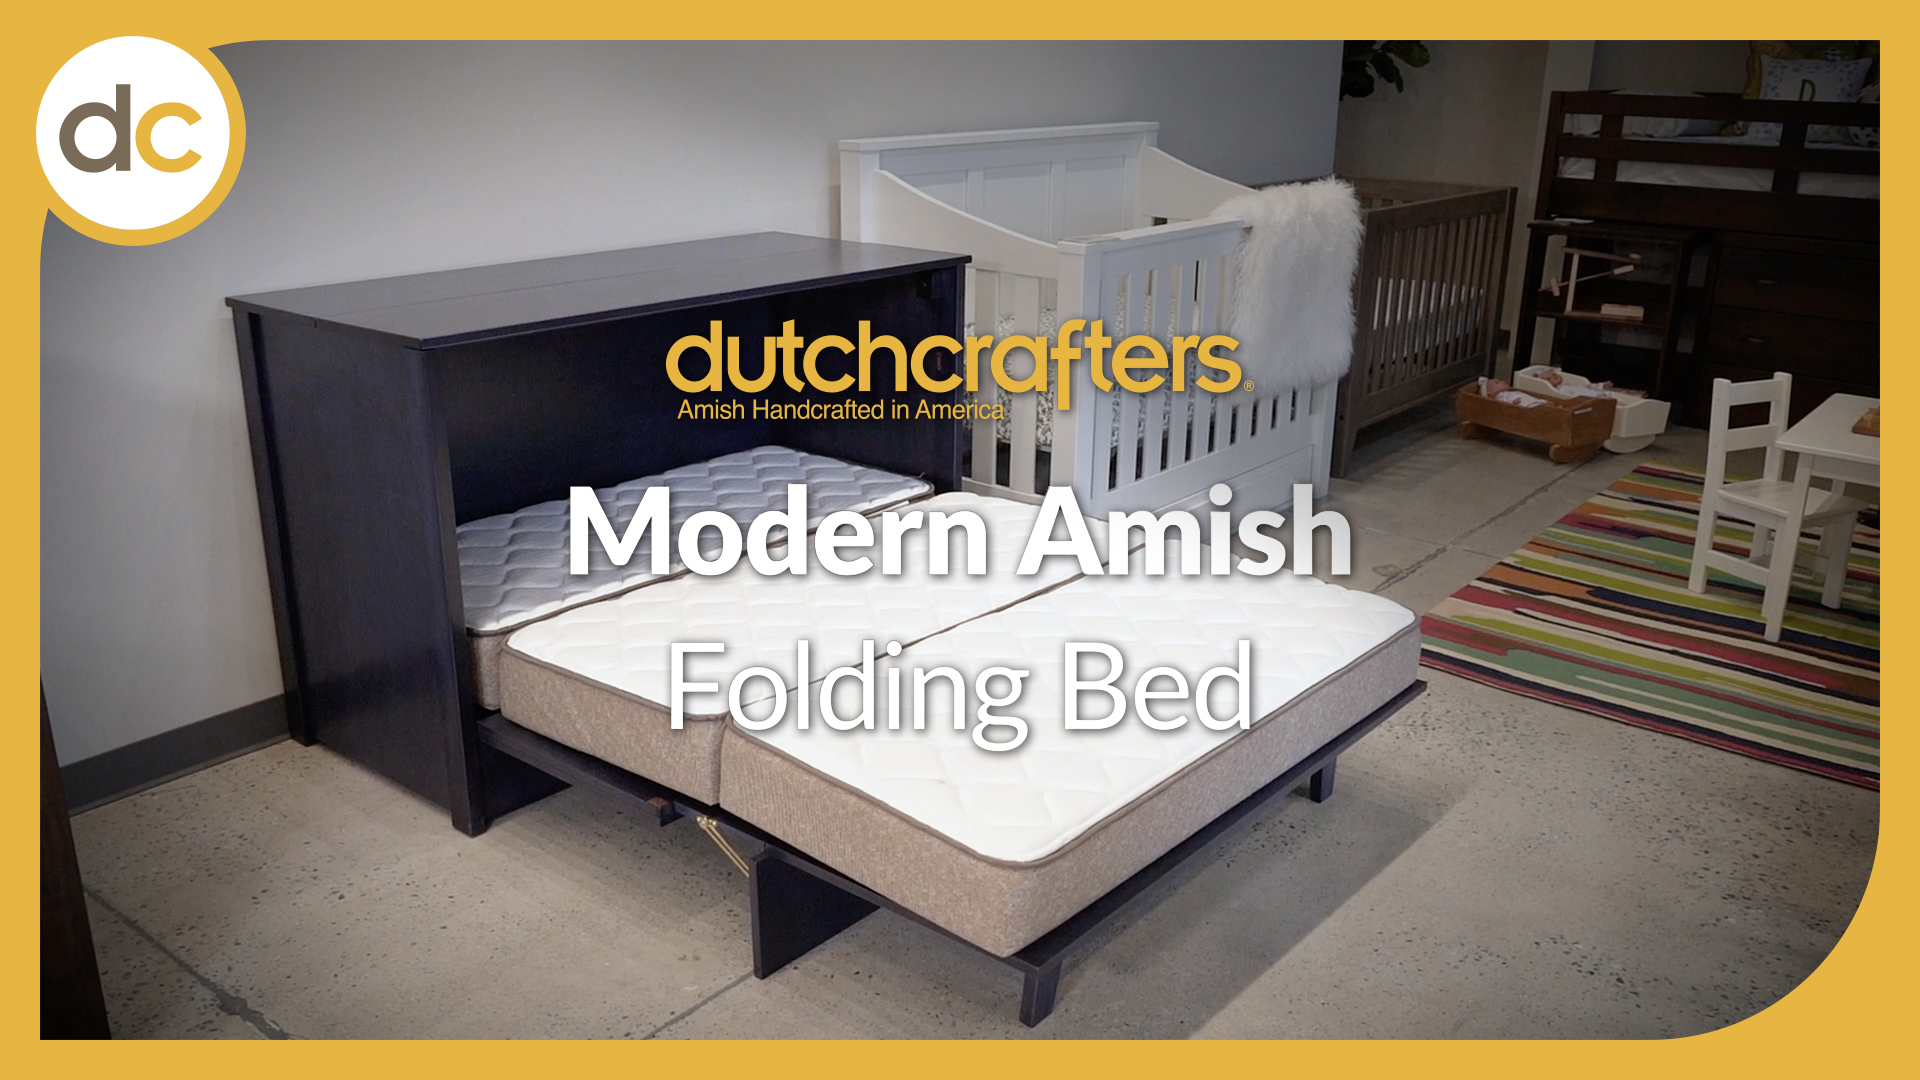 DutchCrafters Modern Amish Folding Bed title over an image of the product